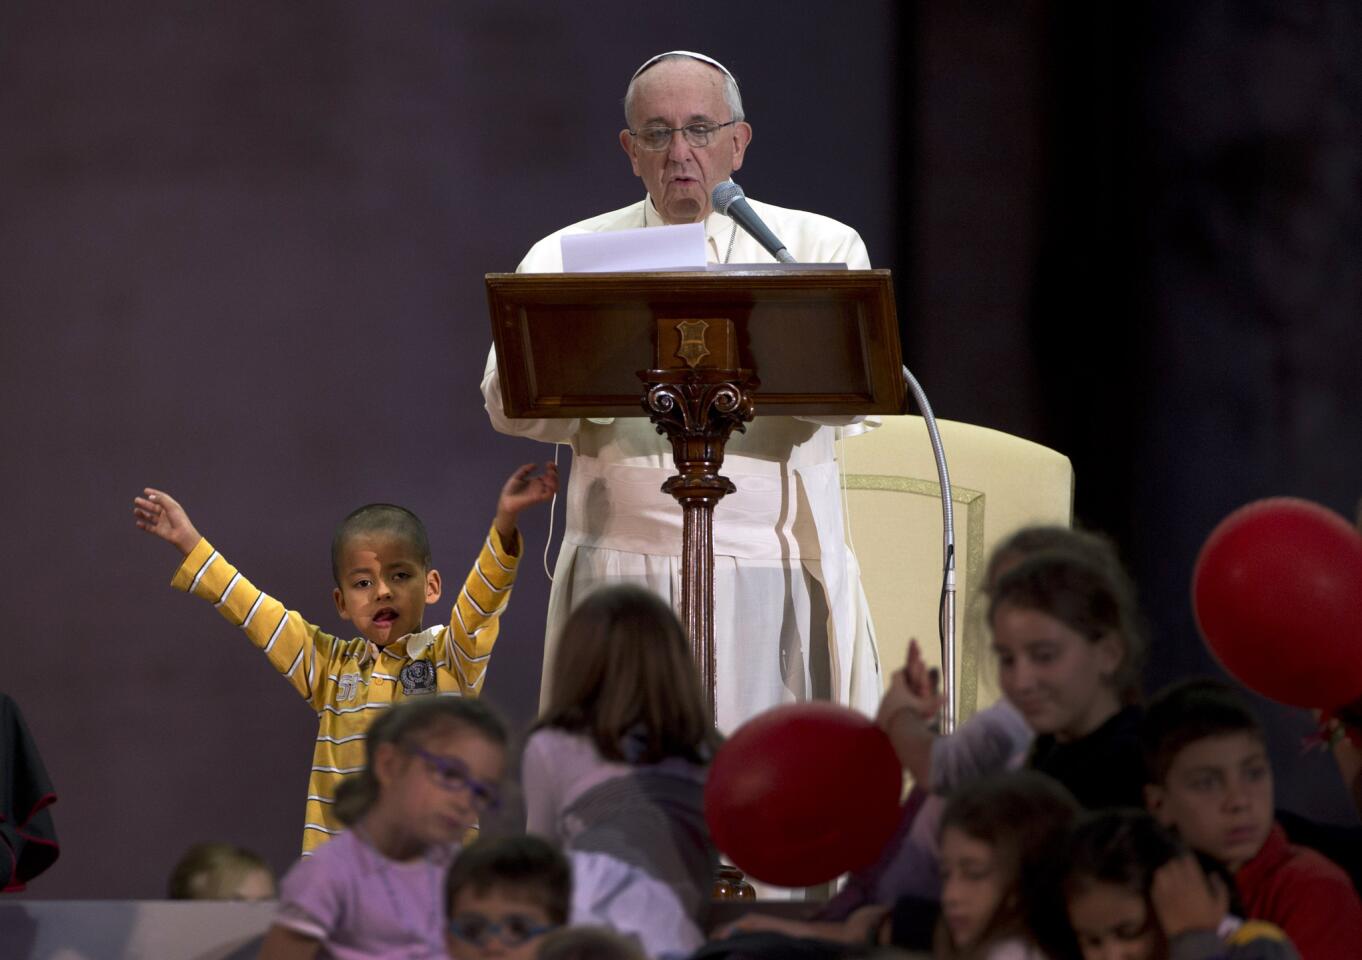 As Pope Francis spoke during a Vatican celebration of families, a young boy wandered onto the stage in St. Peter's Square.